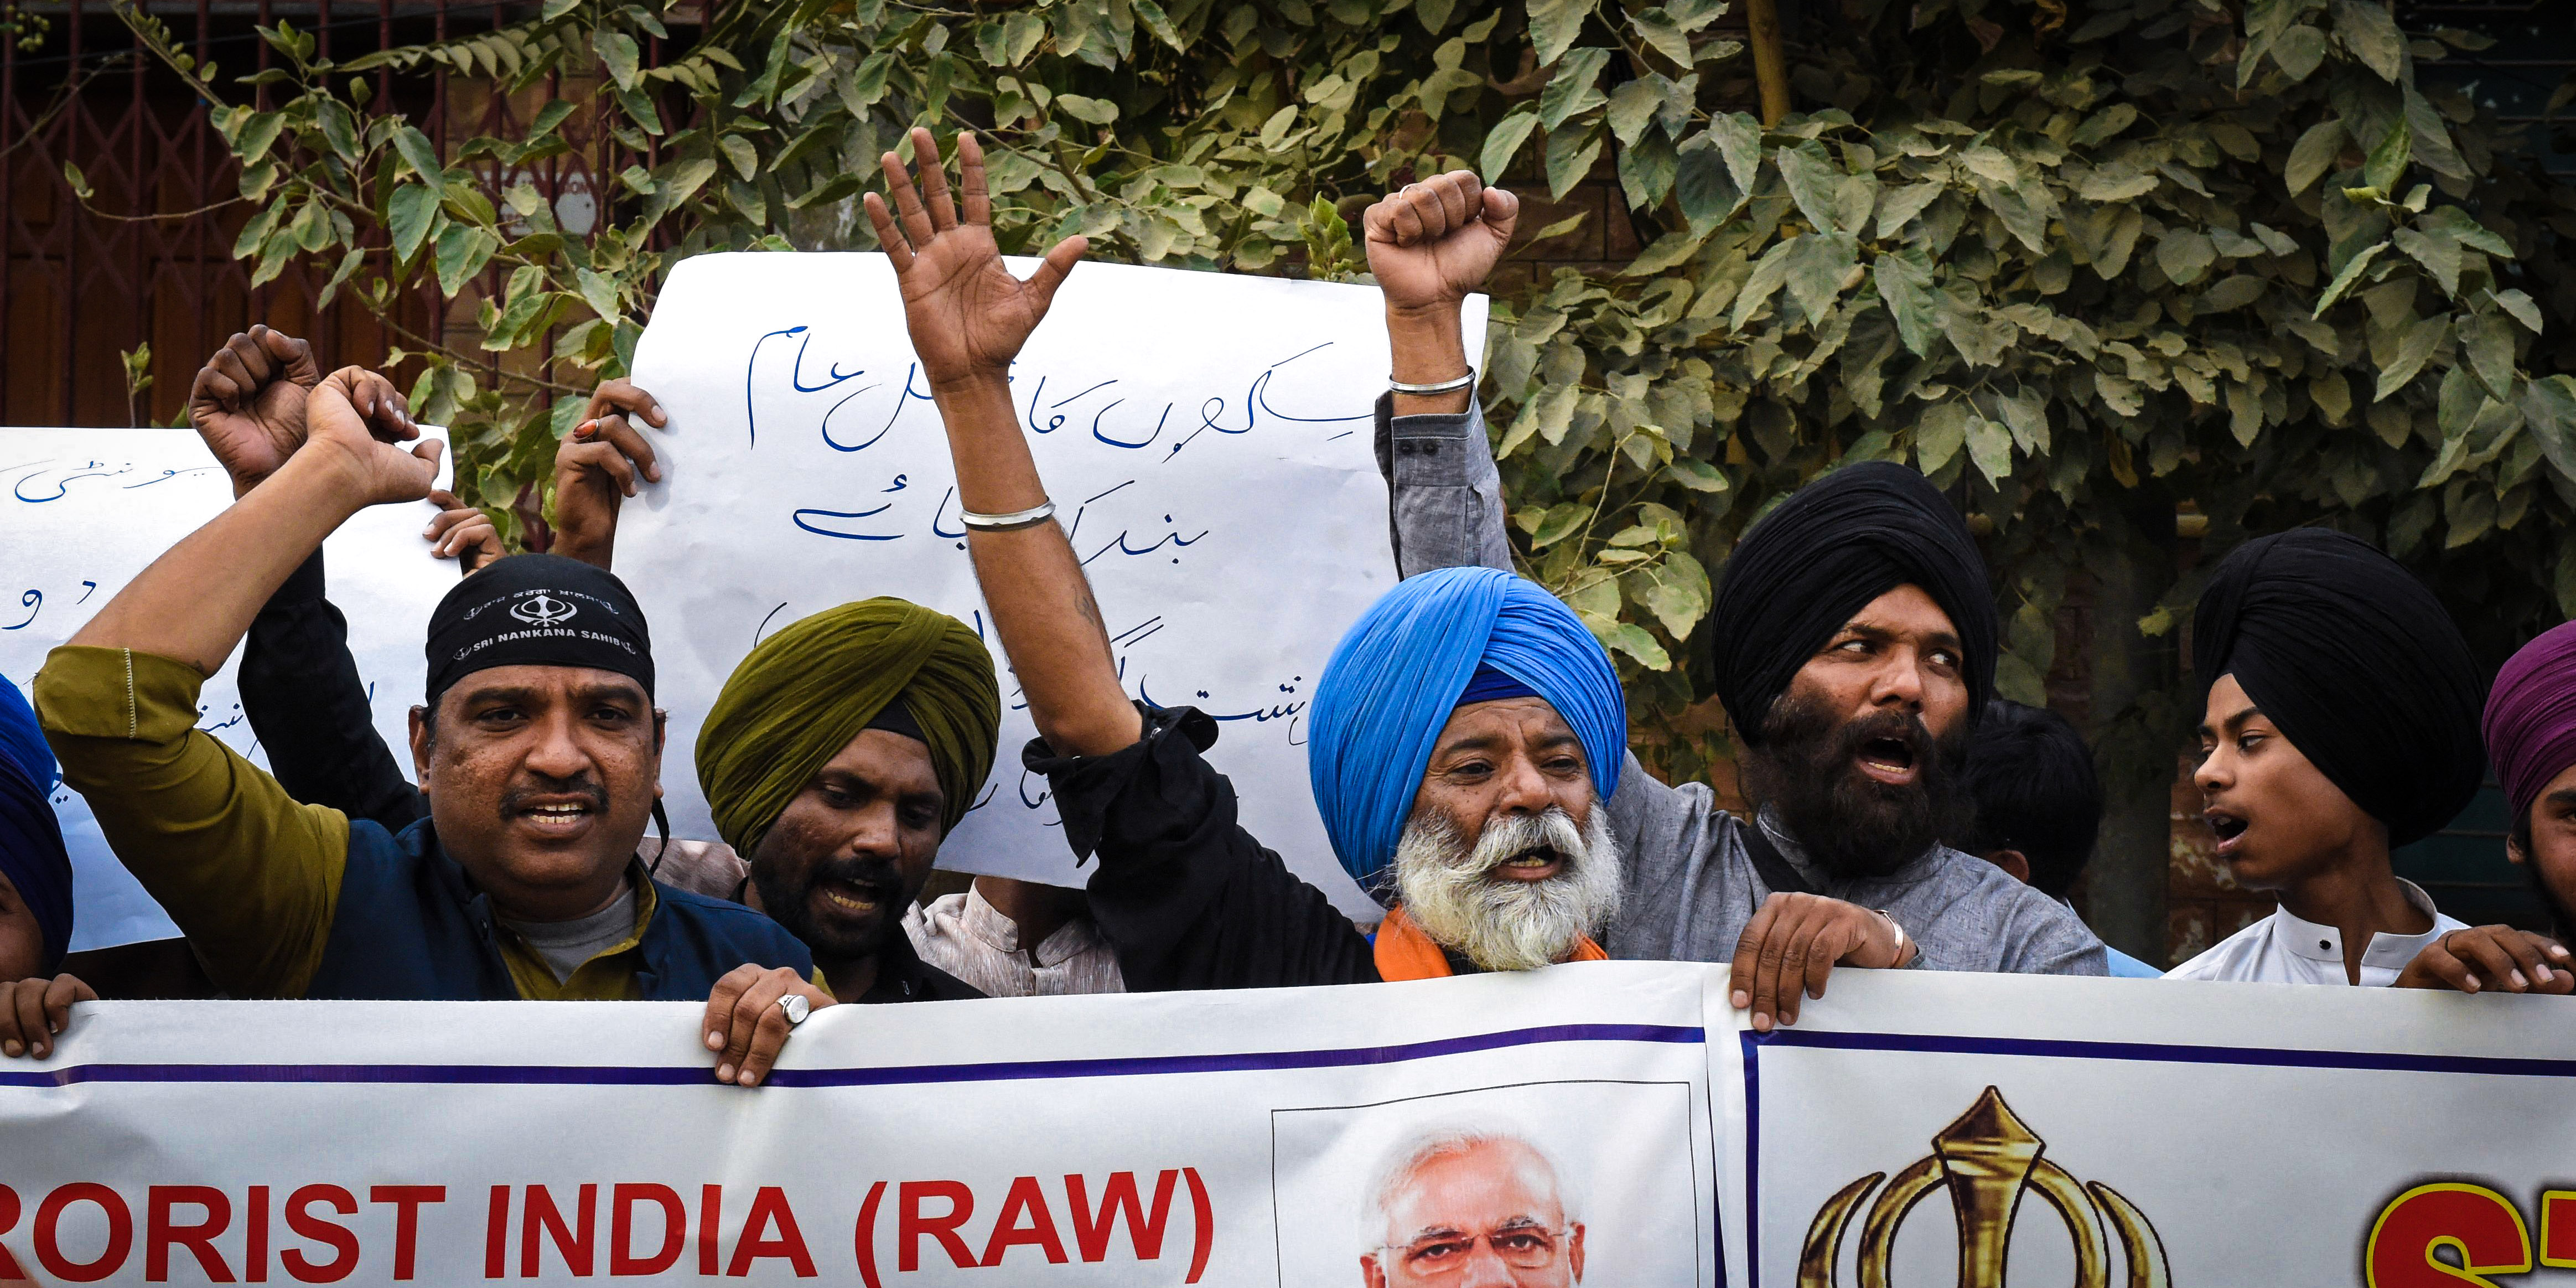 Members of Pakistan's Sikh community shout slogans as they hold banners during a protest in Quetta on September 23, 2023, to condemn the killing of a Sikh separatist Hardeep Singh Nijjar in Canada. India's historic adversary Pakistan said on September 21, that Western nations had failed to see the reality of New Delhi's right-wing leadership after Canada alleged Indian involvement in a killing. Canada expelled an Indian diplomat, prompting a tit-for-tat reaction, after concluding that Indian agents played a role in the June killing near Vancouver of a Sikh separatist, Hardeep Singh Nijjar. (Photo by Banaras KHAN / AFP) (Photo by BANARAS KHAN/AFP via Getty Images)